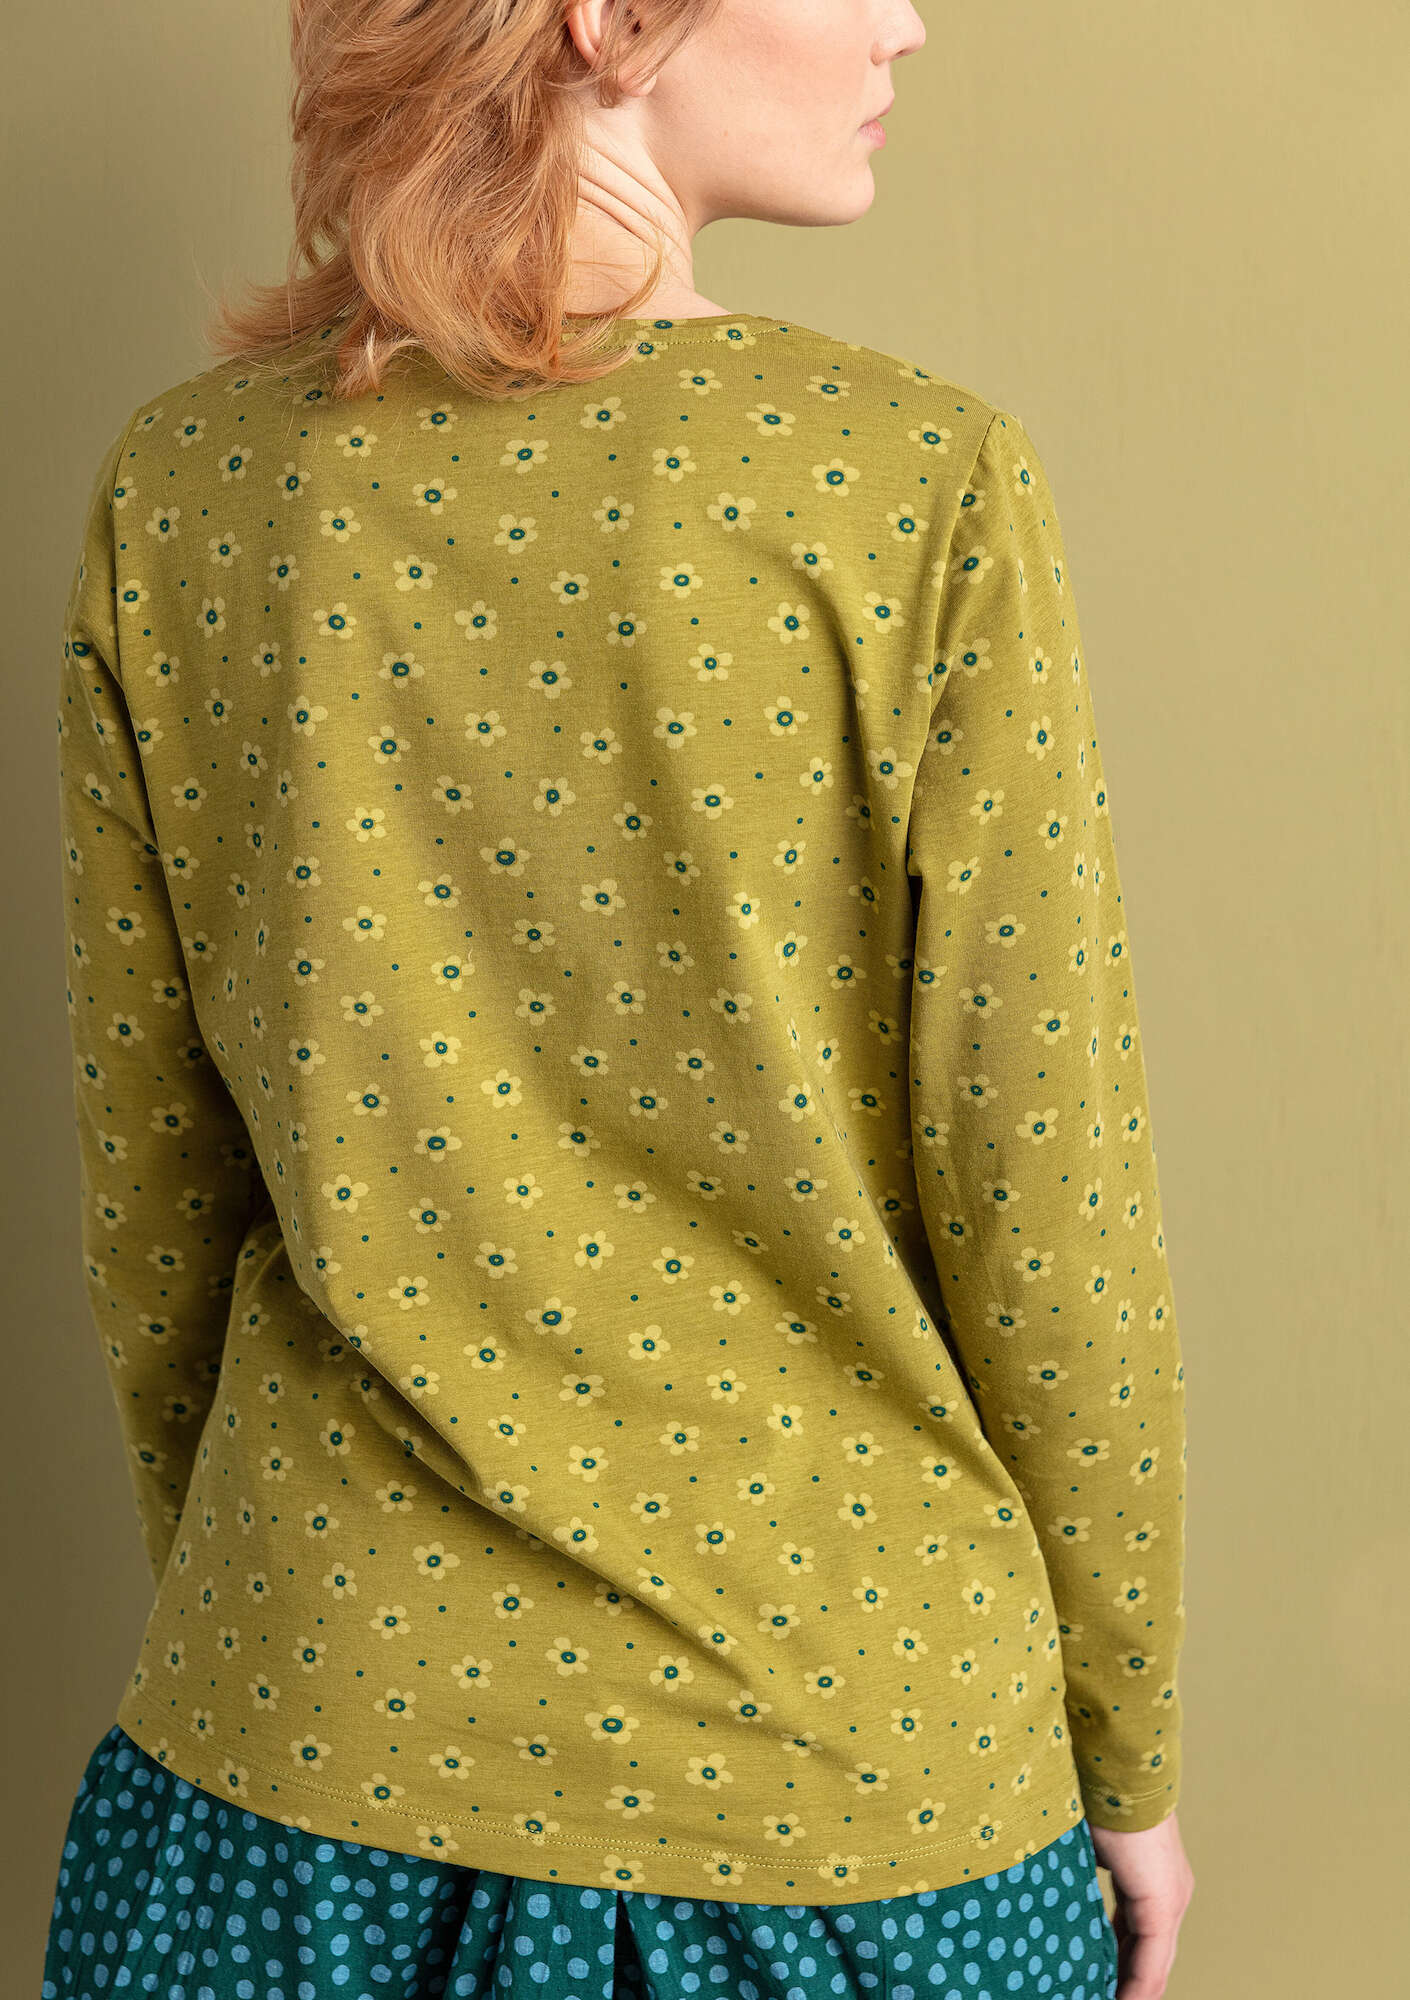 “Pytte” jersey top in organic cotton/elastane avocado/patterned